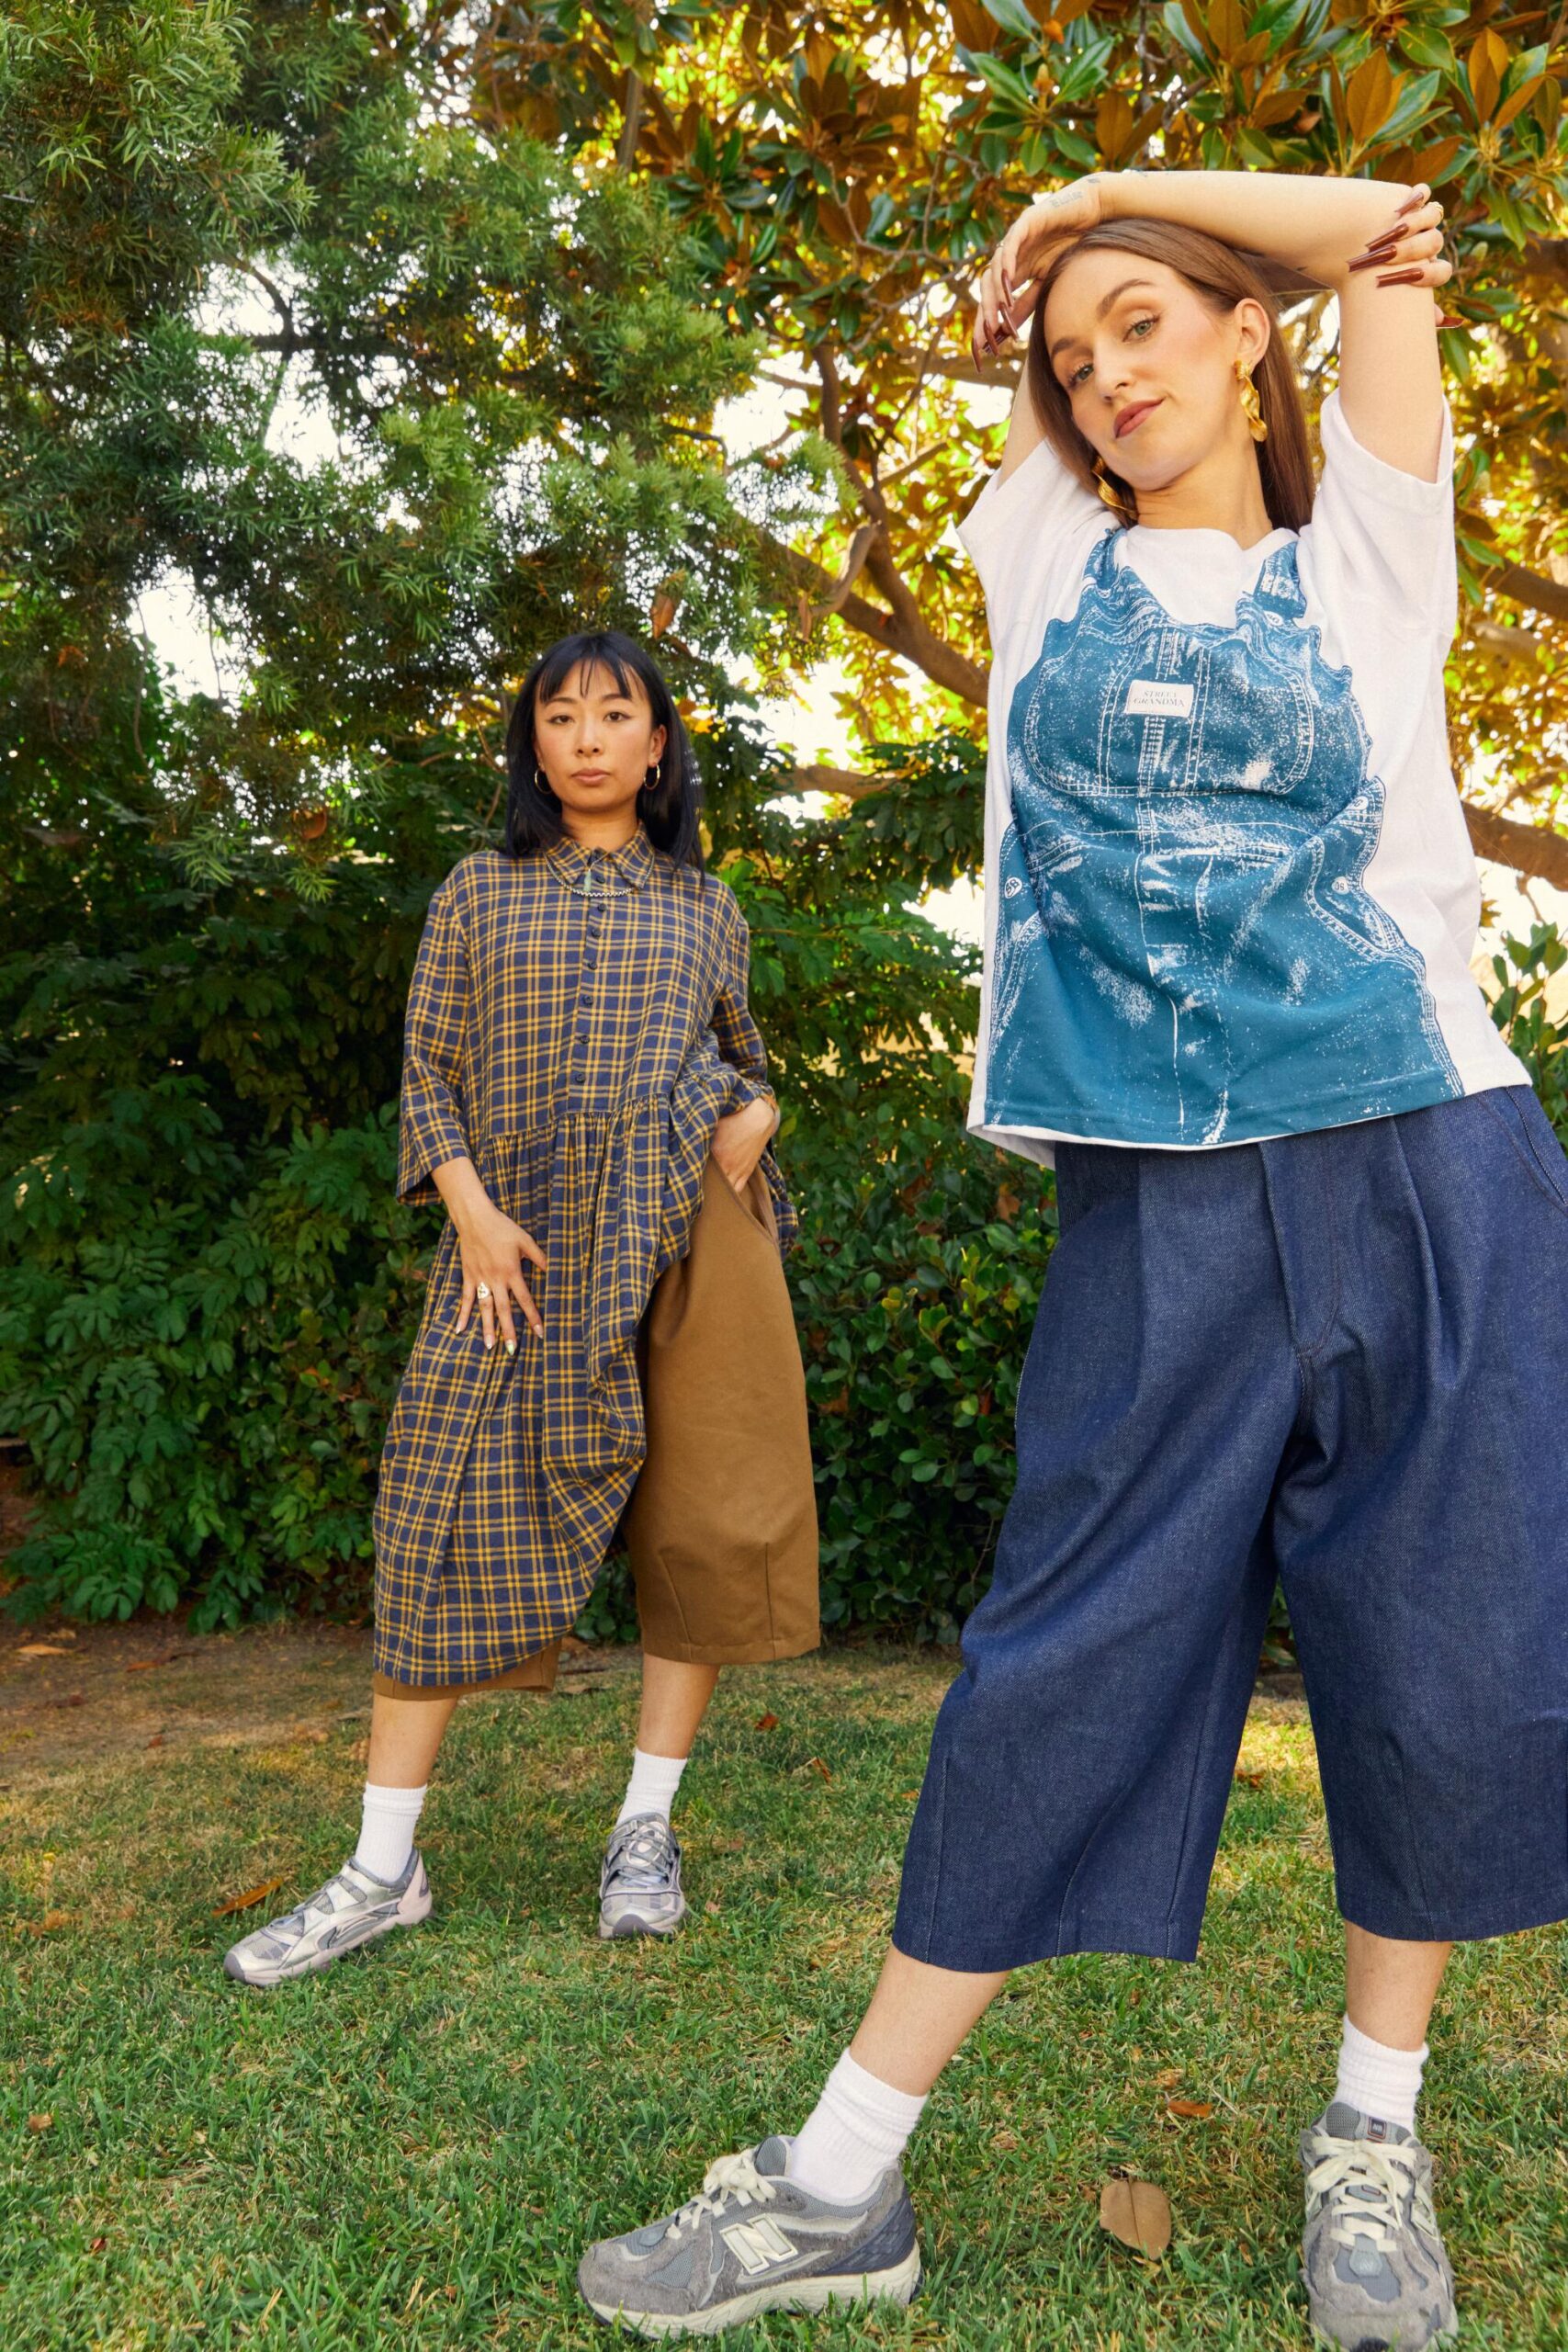 Two people stand outdoors wearing relaxed, oversized clothing